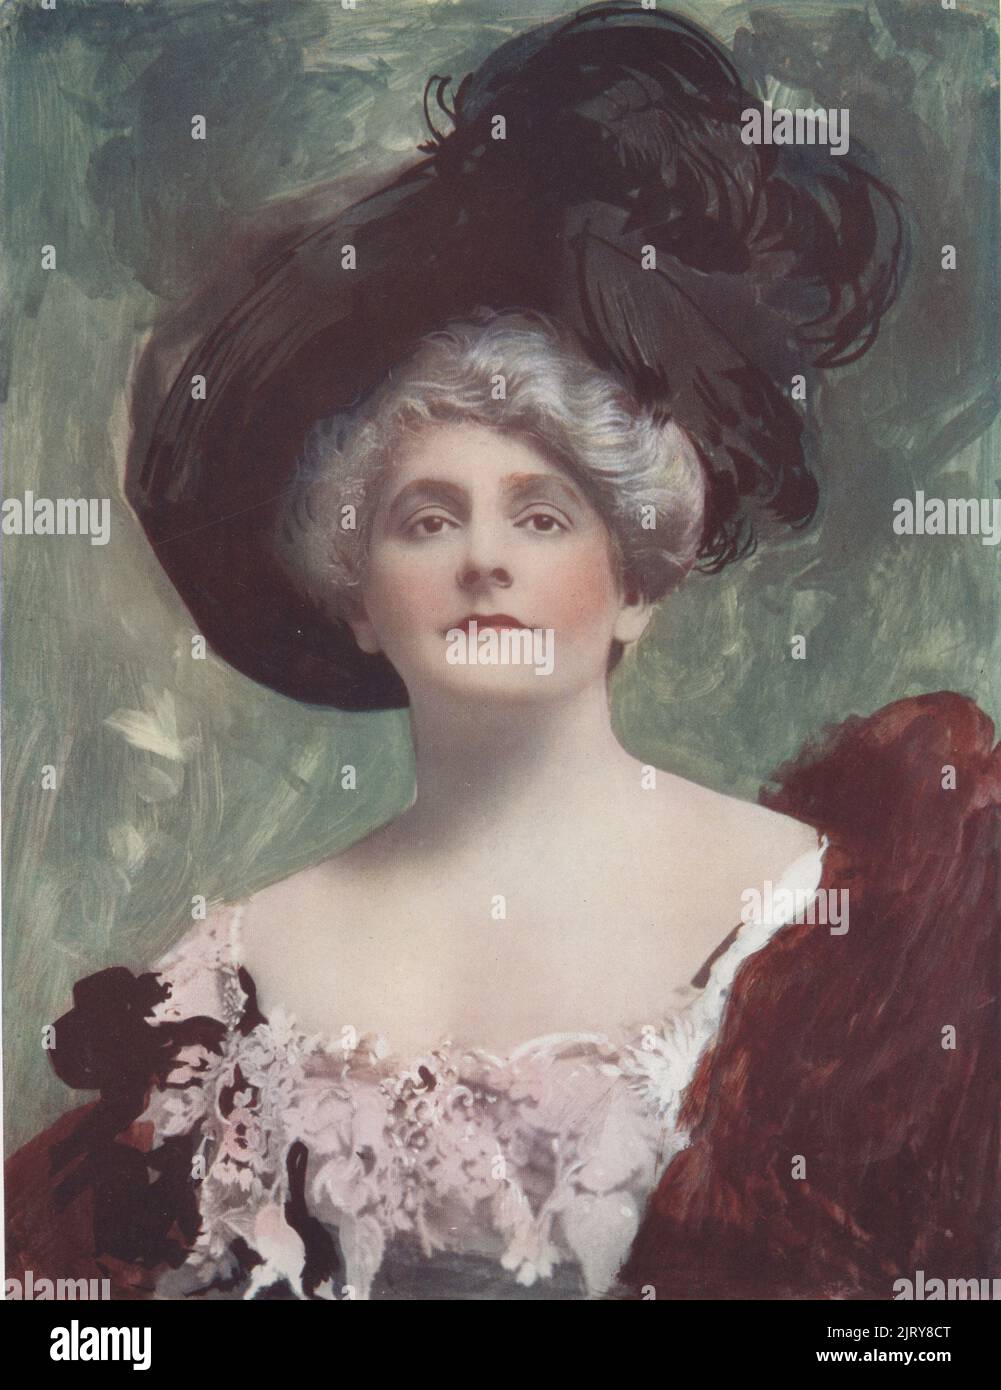 Saba Raleigh as Lady Aline Redwood in The Best of Friends, a pro-Boer play by Cecil Raleigh at Drury Lane, 1902. Isabel Pauline Rowlands, English actress and wife of playwright Cecil Raleigh, 1862-1923. Photograph by Reginald Fellows Willson. Colour printing of a hand-coloured illustration based on a monochrome photograph from George Newnes’s Players of the Day, London, 1905. Stock Photo